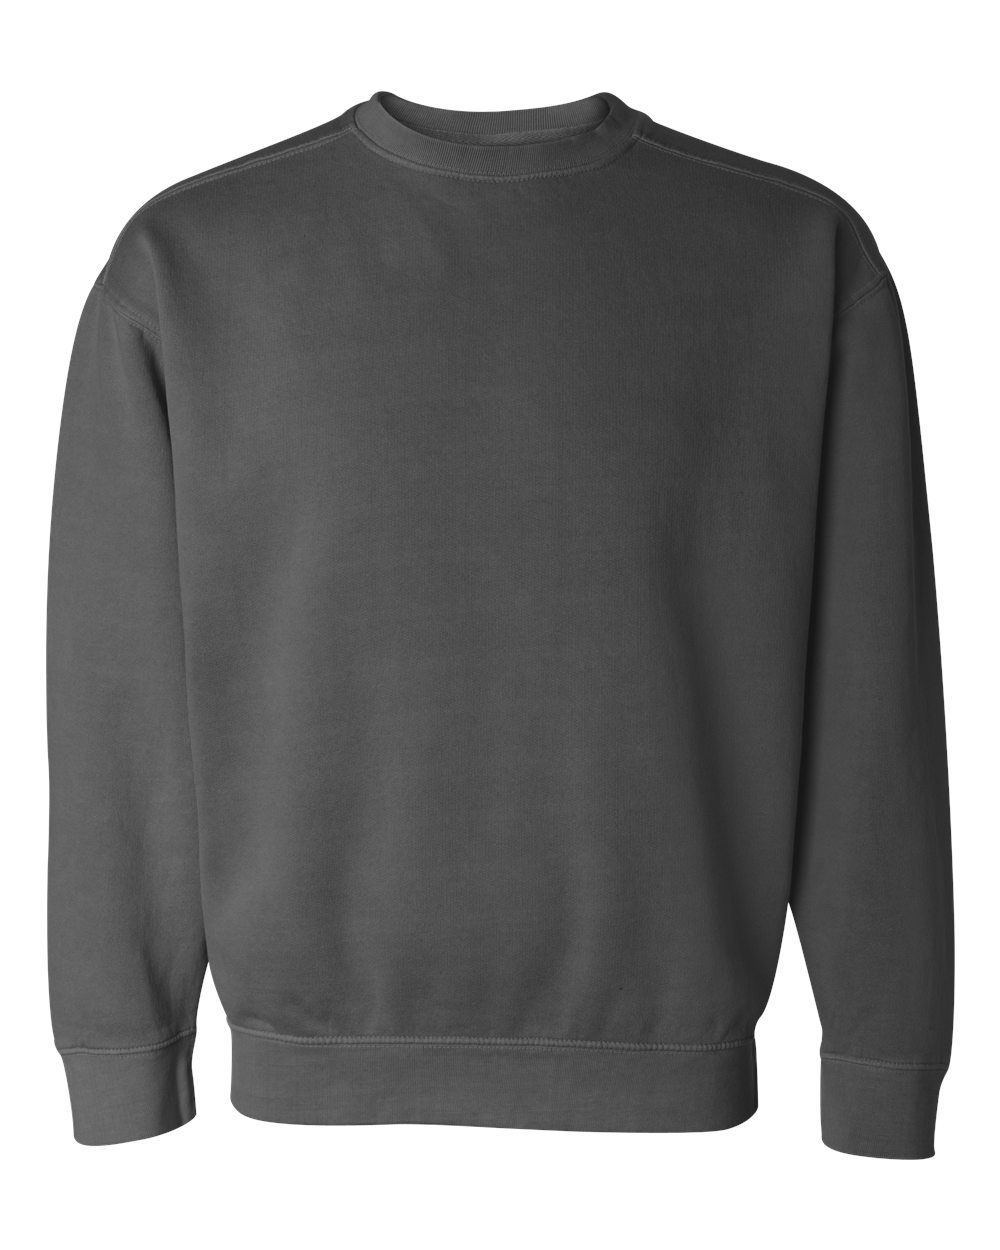 Comfort Colors 1566 Crewneck Sweater with Custom Embroidery